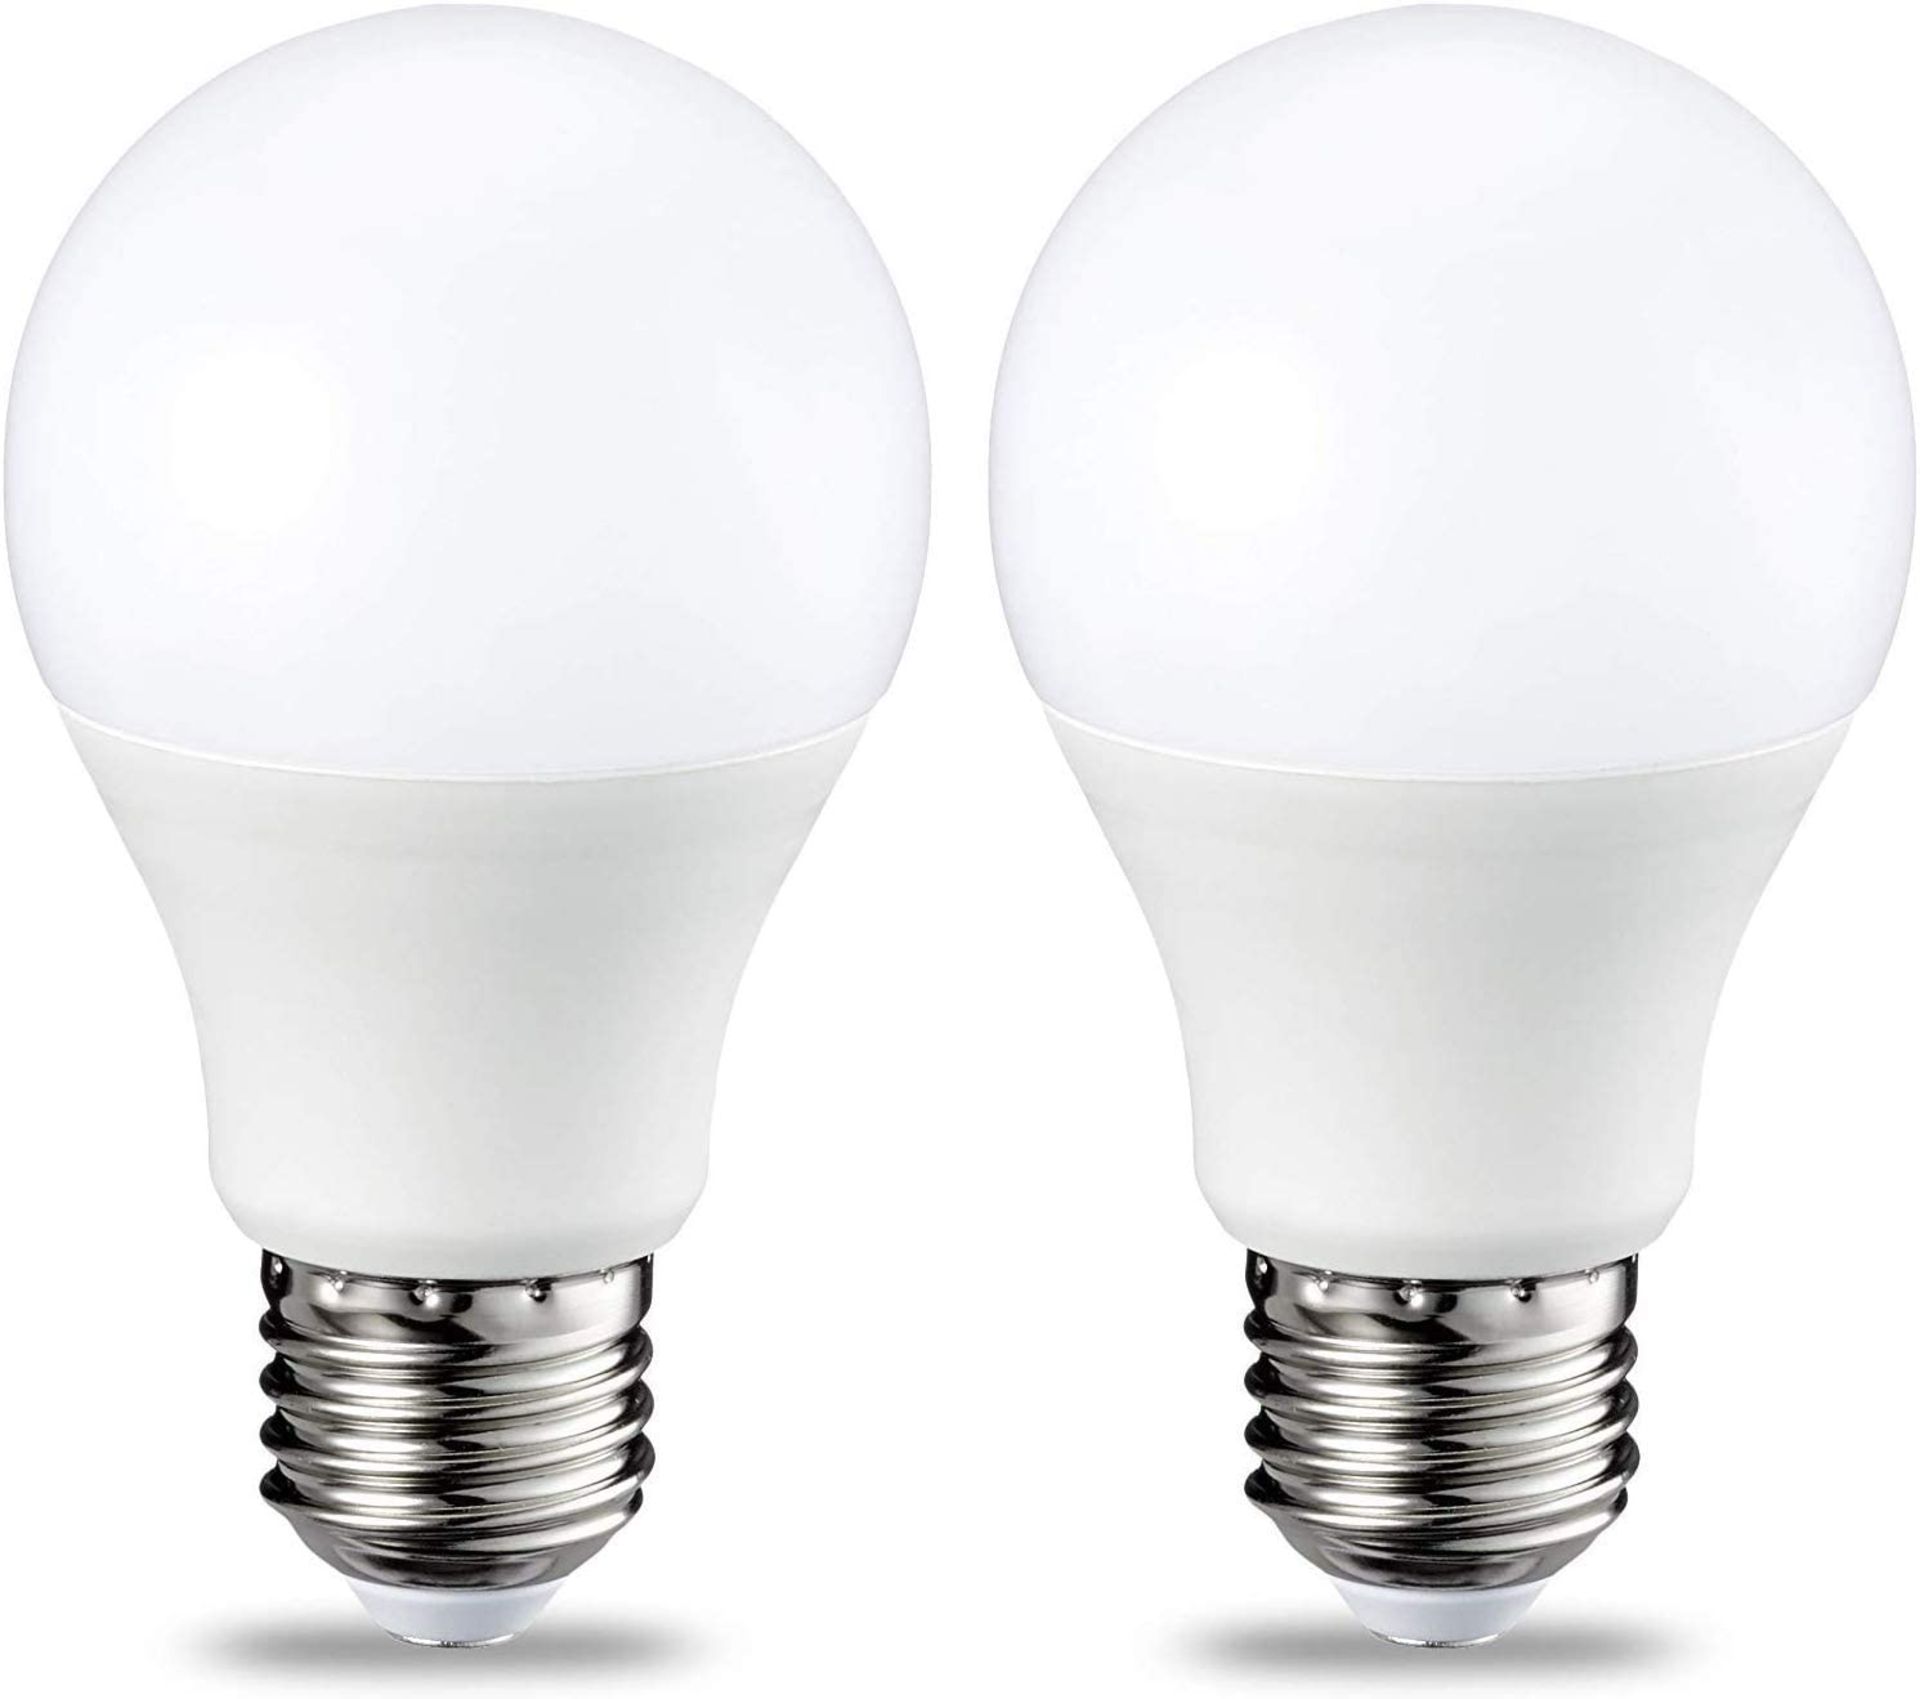 AmazonBasics LED E27 Edison Screw Bulb, 9W (equivalent to 60W), Warm White, Dimmable - Pack of 2